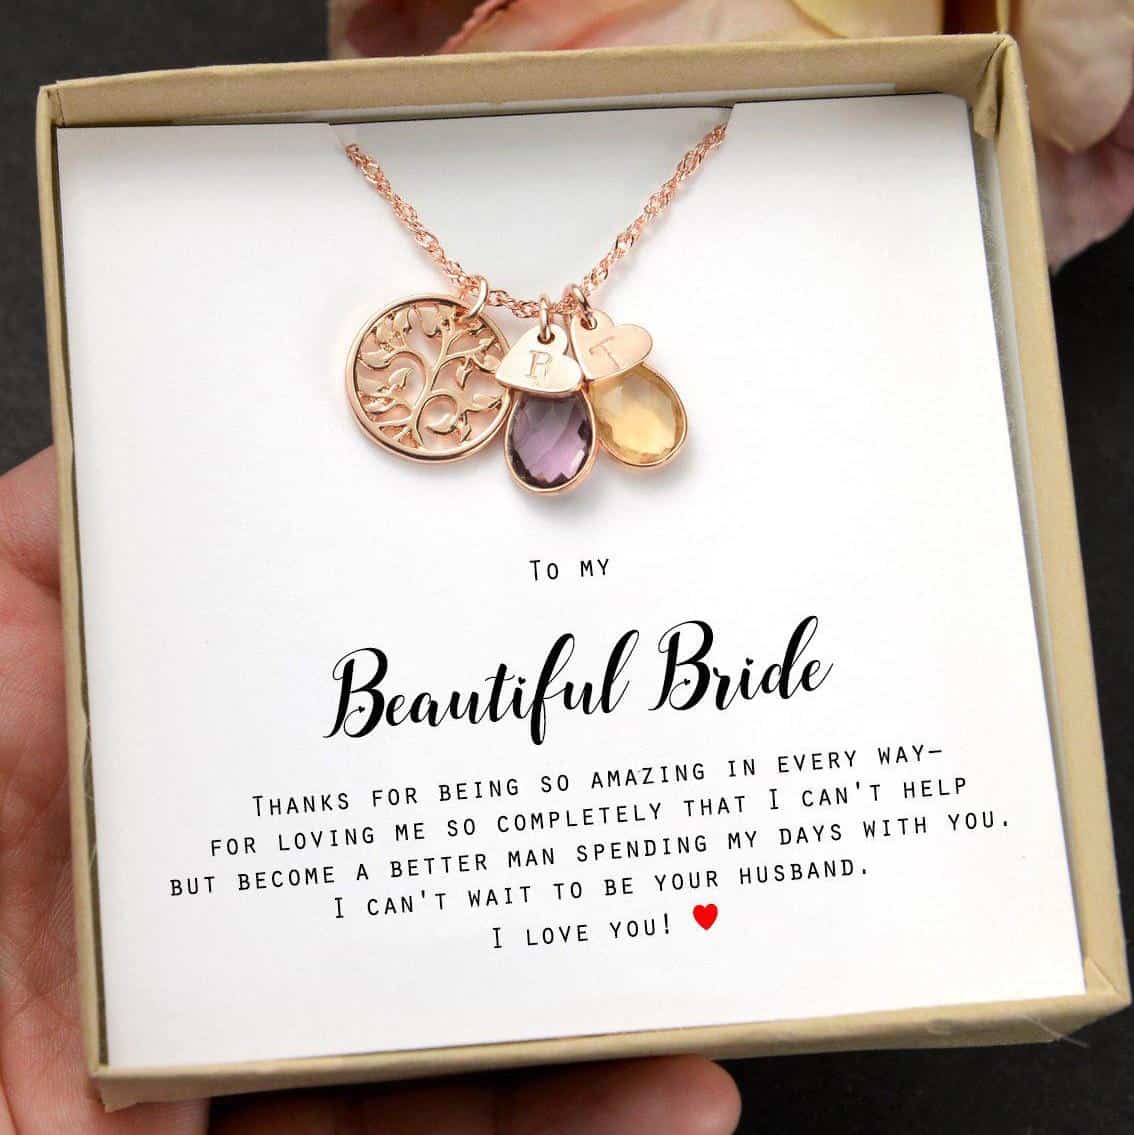 To My Bride Gift From Groom Groom To Future Wife Gift Wedding Day From Groom To Bride Wedding Day Gift For Bride From Groom